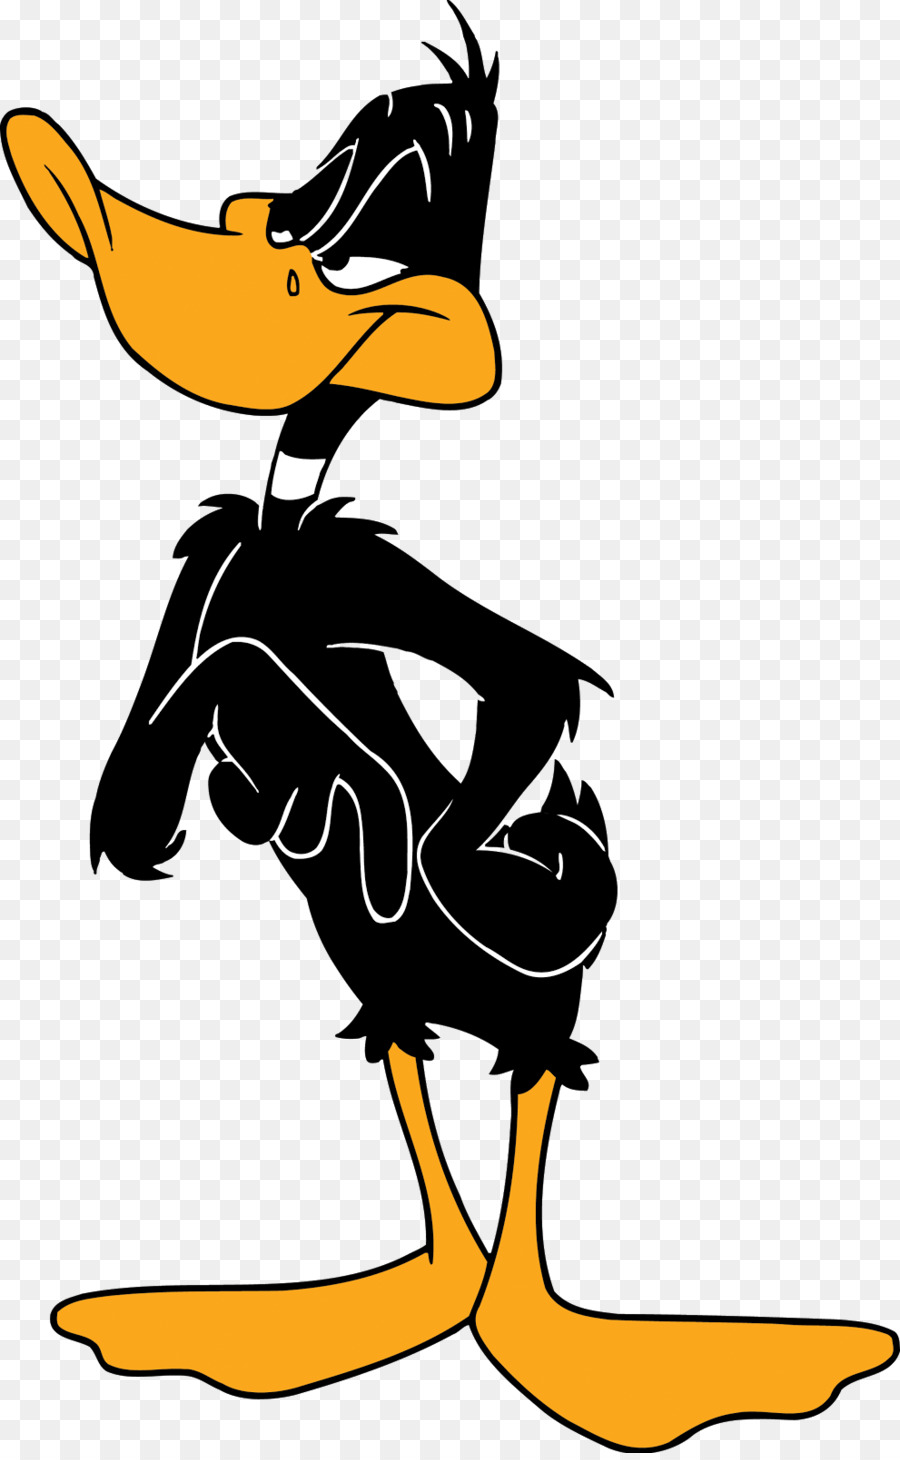 Daffy Duck Bugs Bunny Rabbit Rampage Porky Pig Donald Duck - donald duck png download - 991*1600 - Free Transparent Daffy Duck png Download.